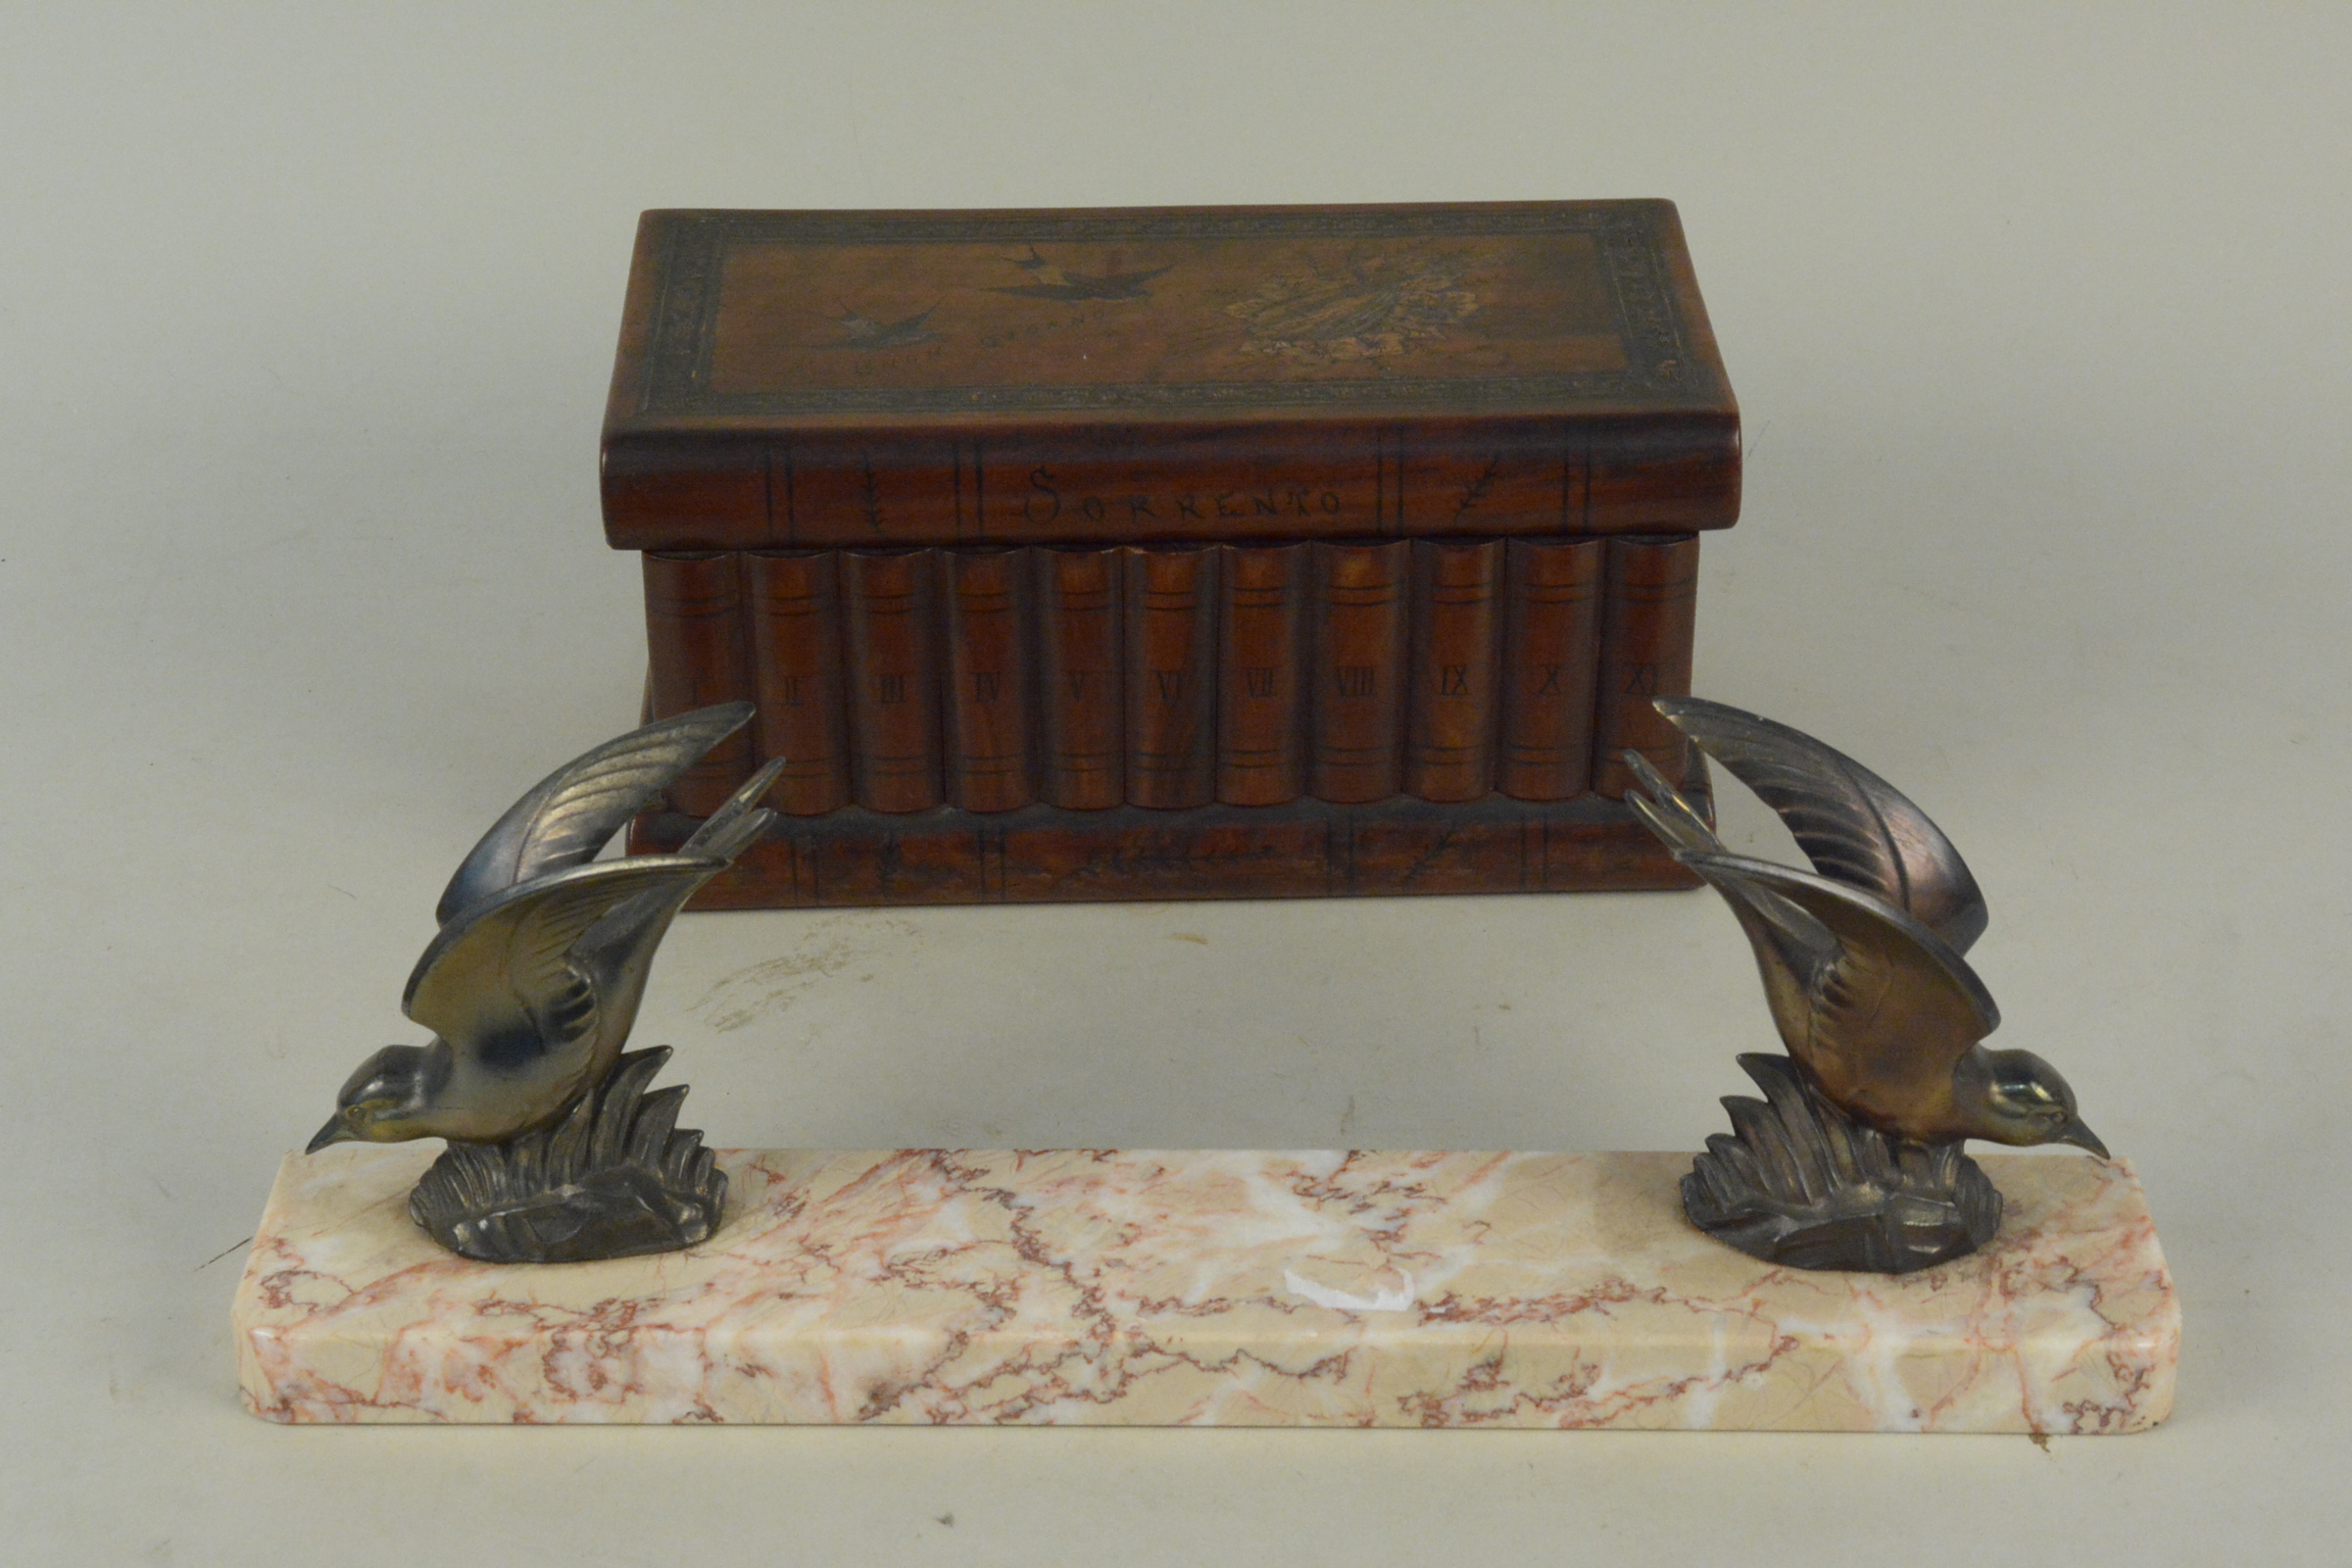 A vintage Italian Sorrento ware jewellery puzzle box decorated with birds and a lute on the top,